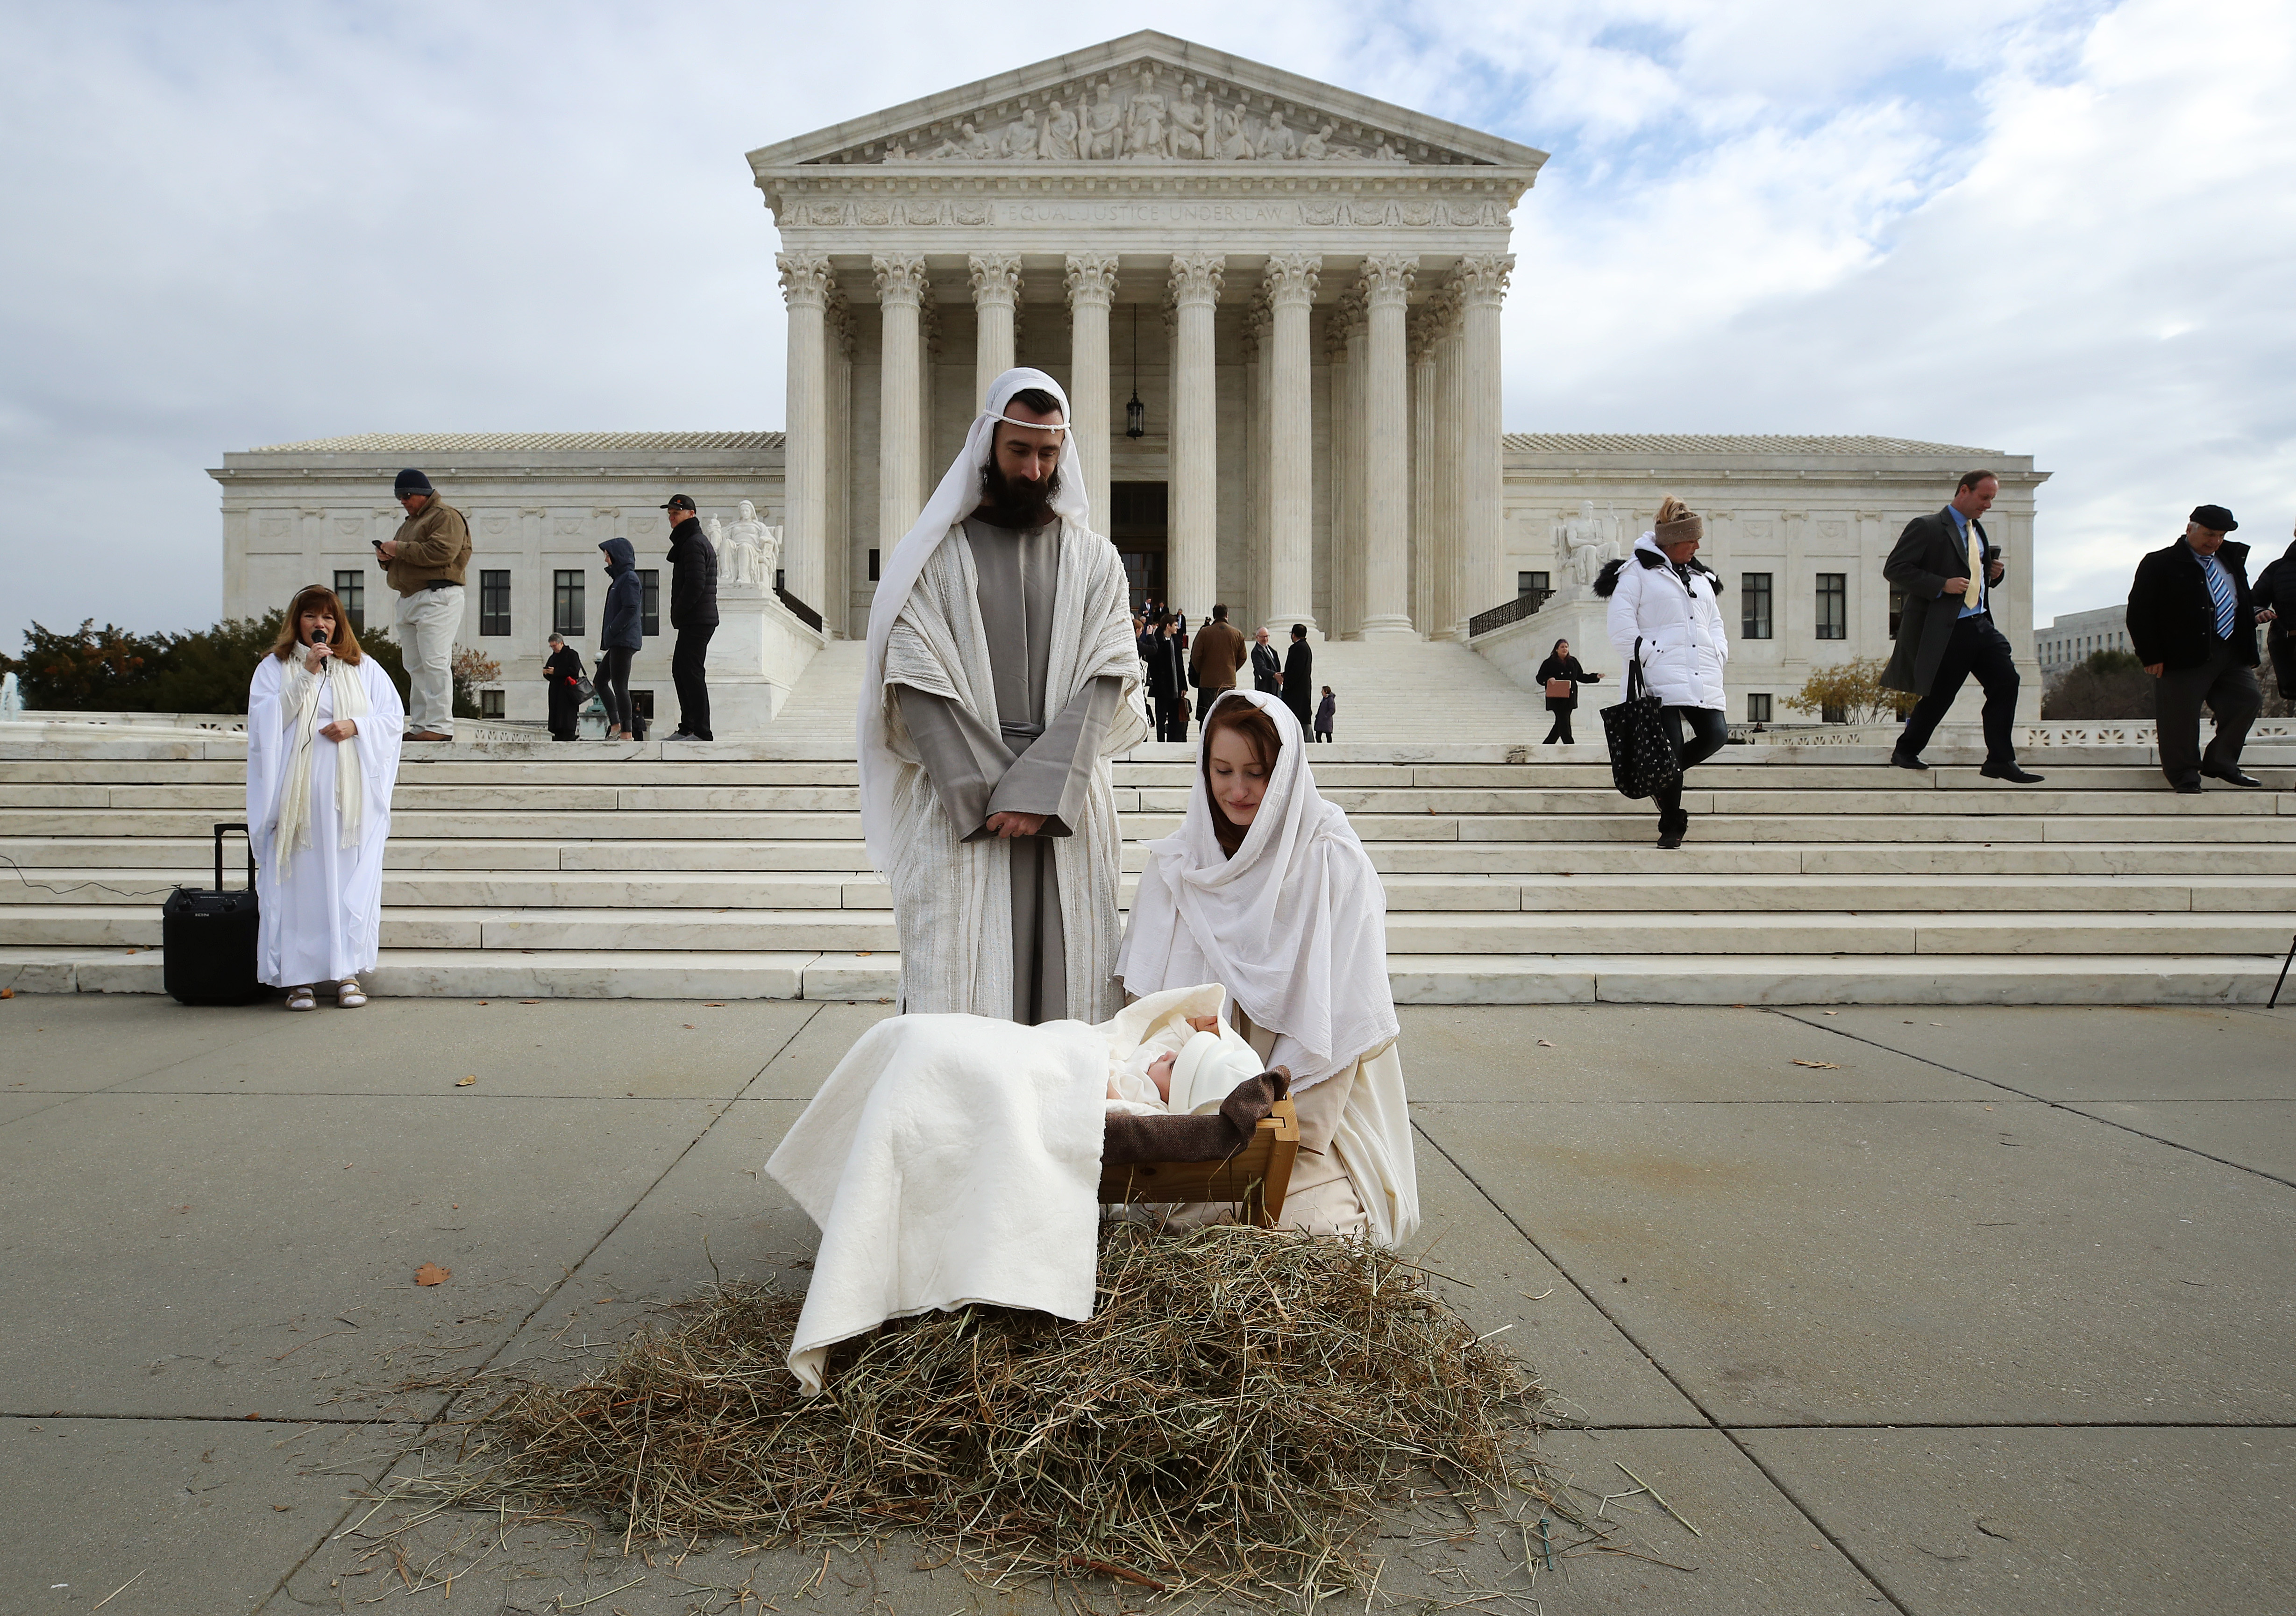 A live nativity scene is conducted in front of the Supreme Court on December 4, 2019. (Mark Wilson/Getty Images)